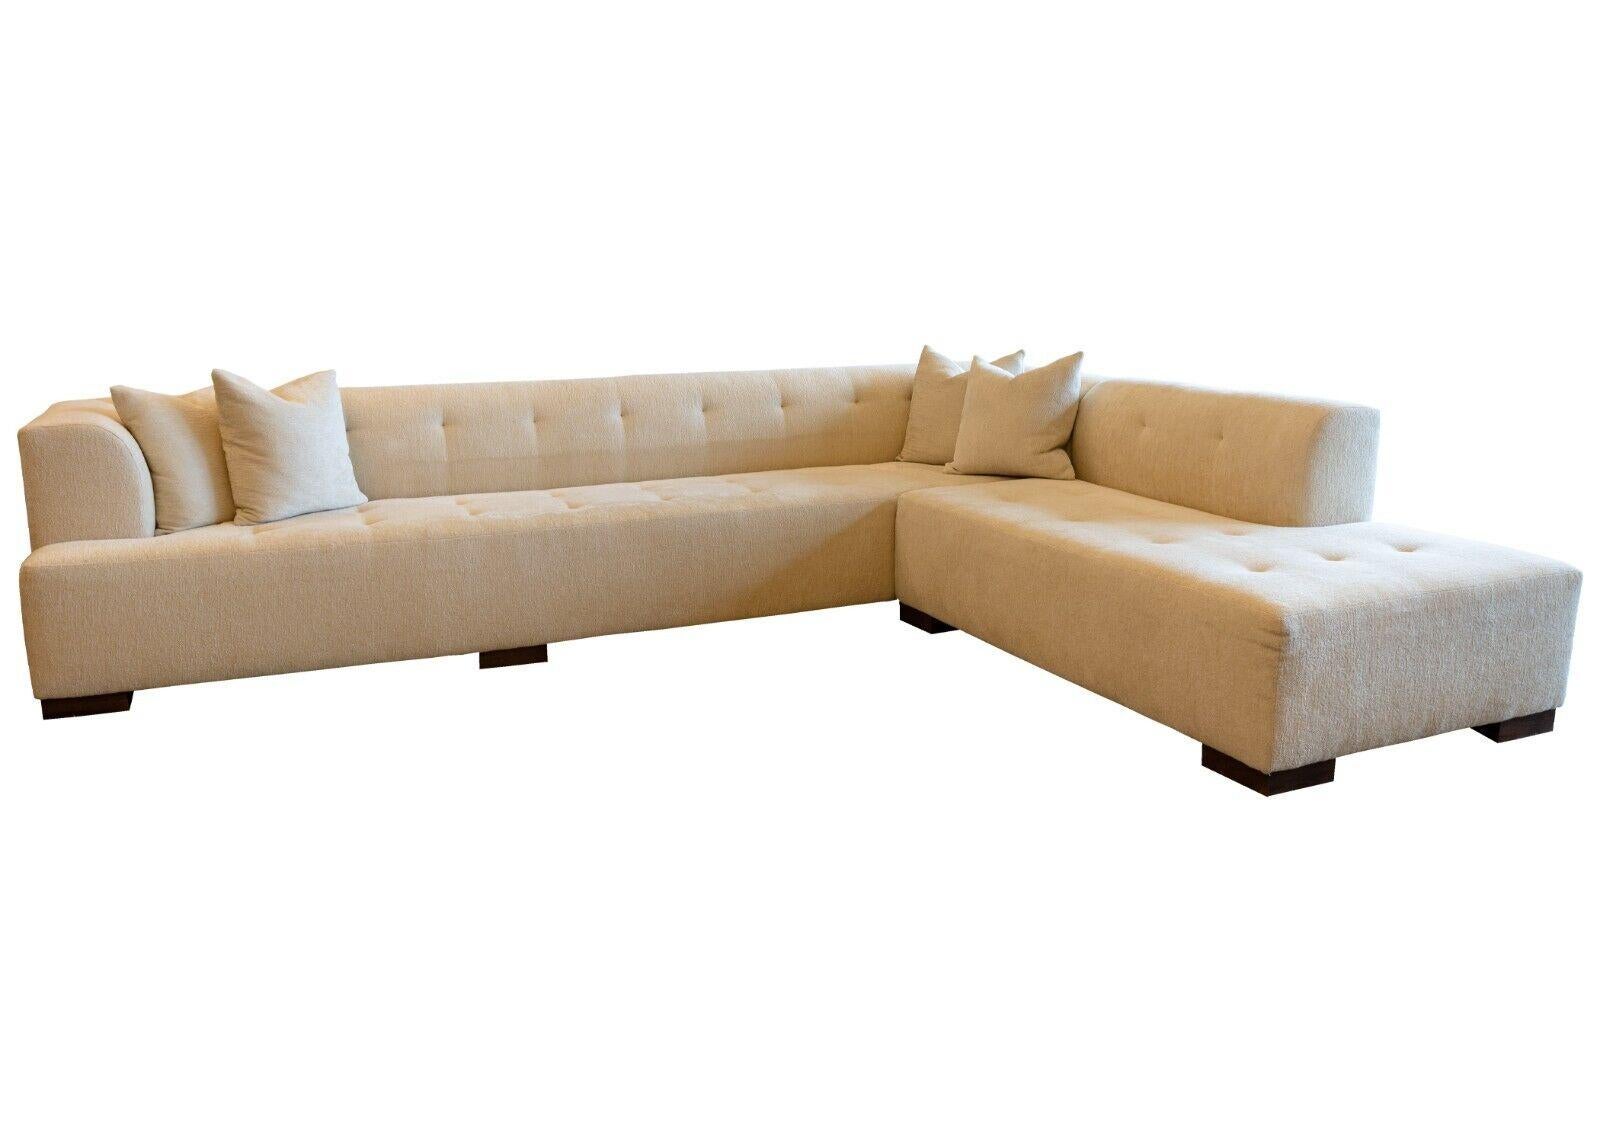 A contemporary modern custom made cream cream tufted glant 2 piece sectional sofa. This gorgeous sectional sofa features a modular 2 piece design, in a very elegant cream color upholstery. This piece is constructed with large square, wooden legs